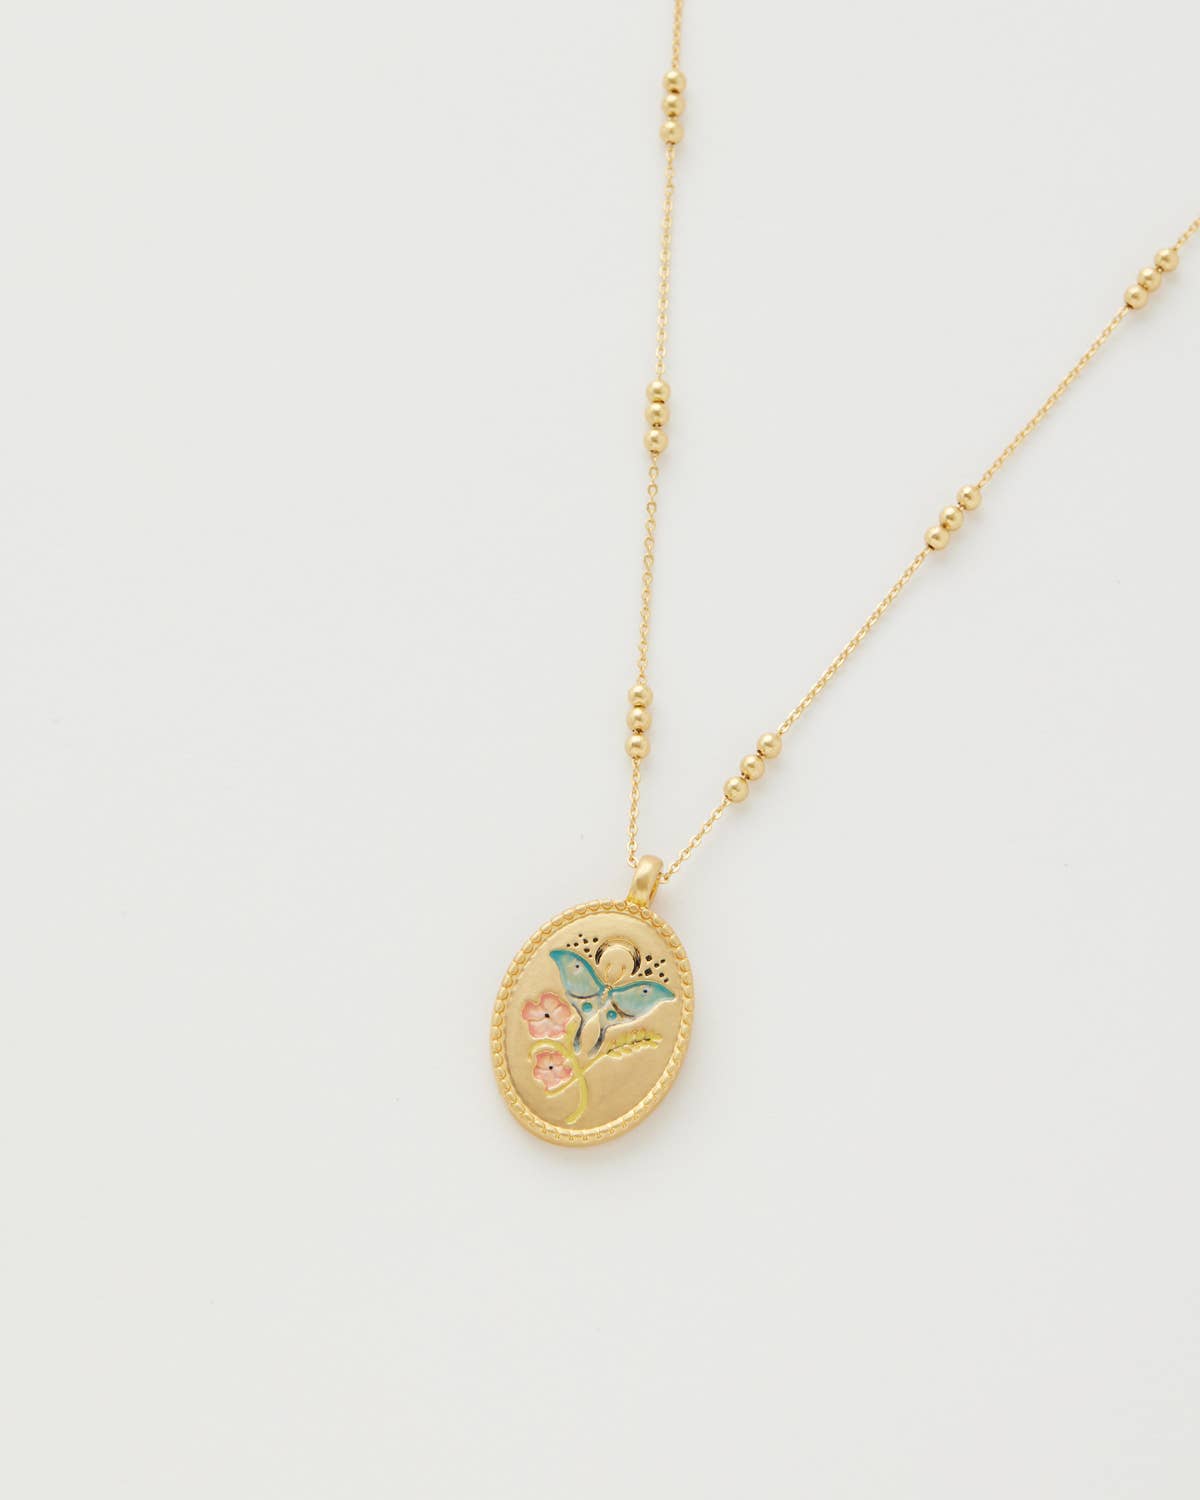 Zodiac Necklace - Virgo - Out of the Blue